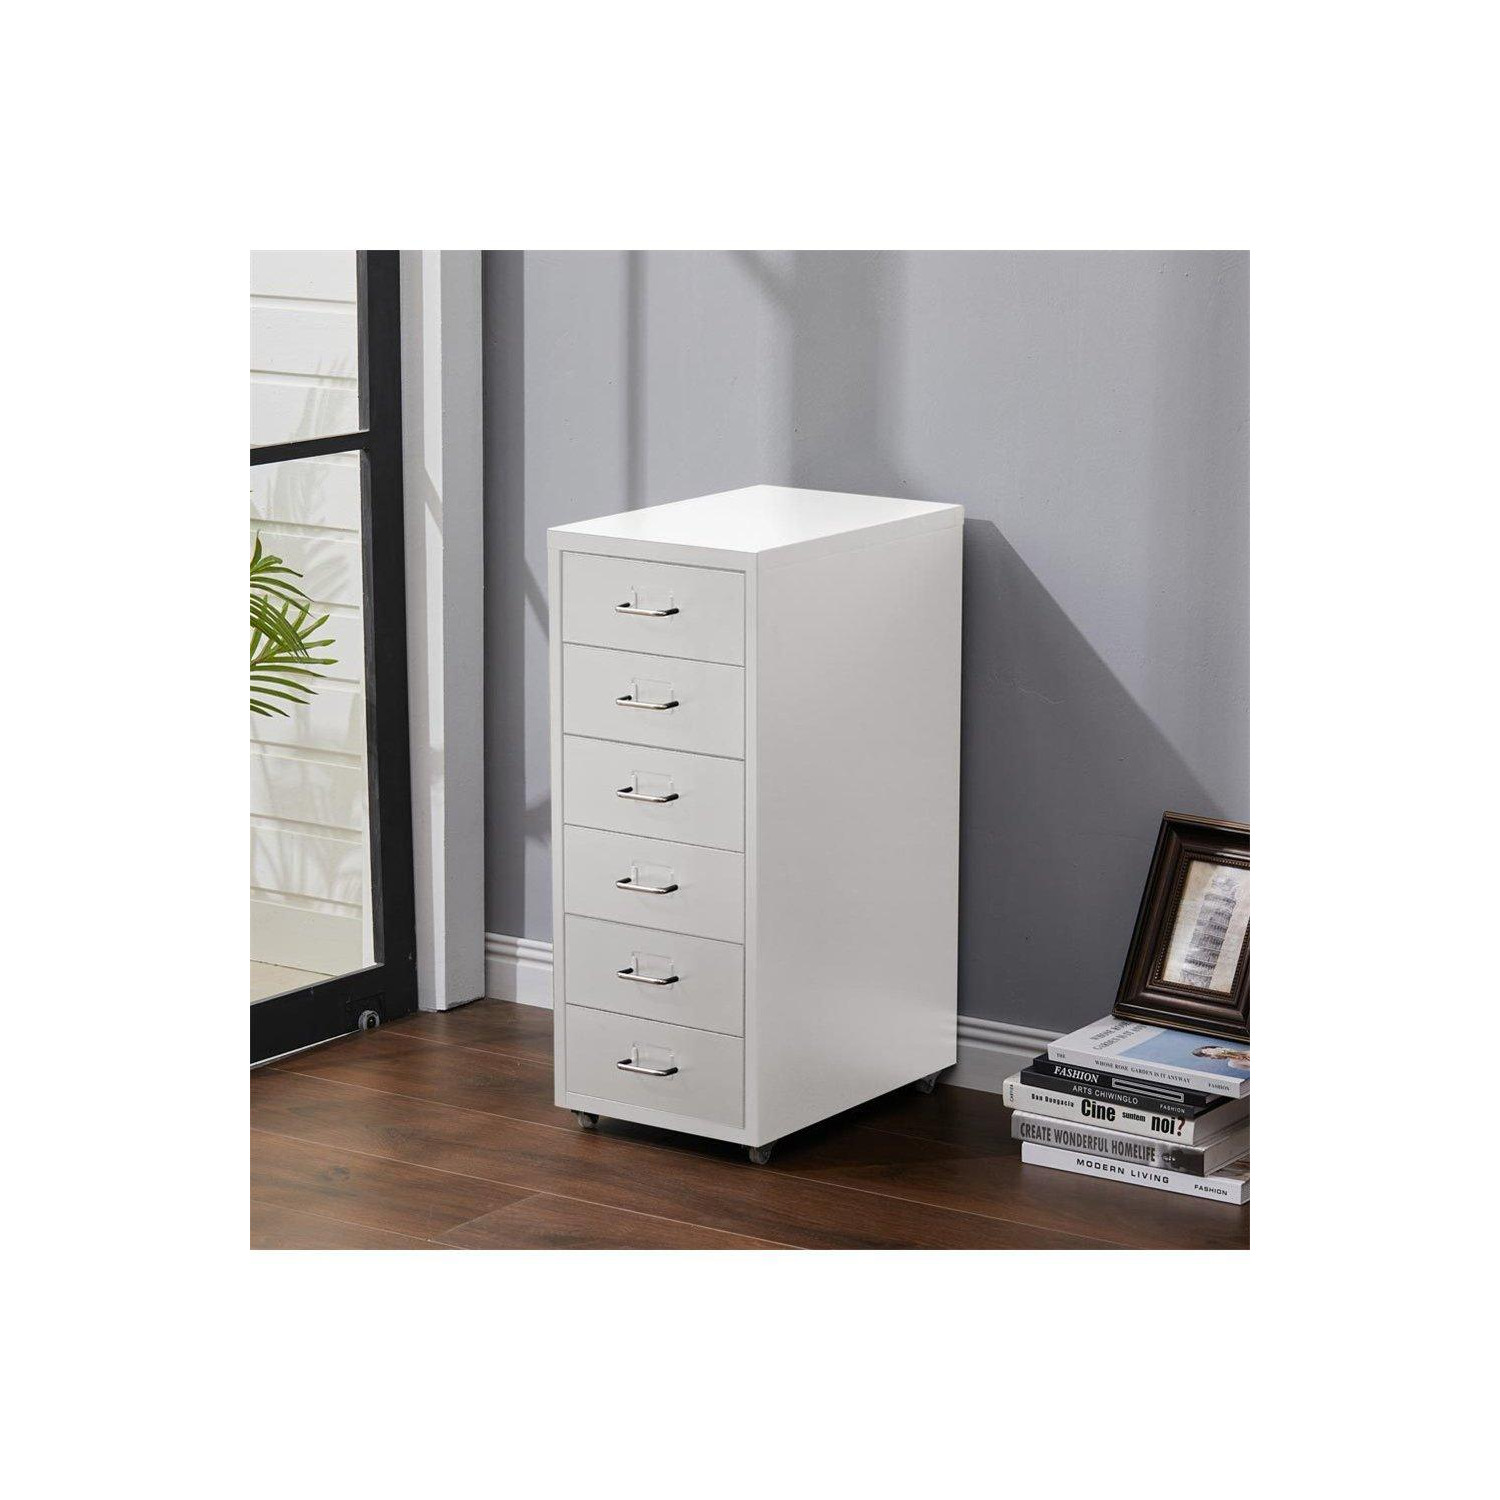 6 Drawers Vertical File Cabinet with Wheels - image 1